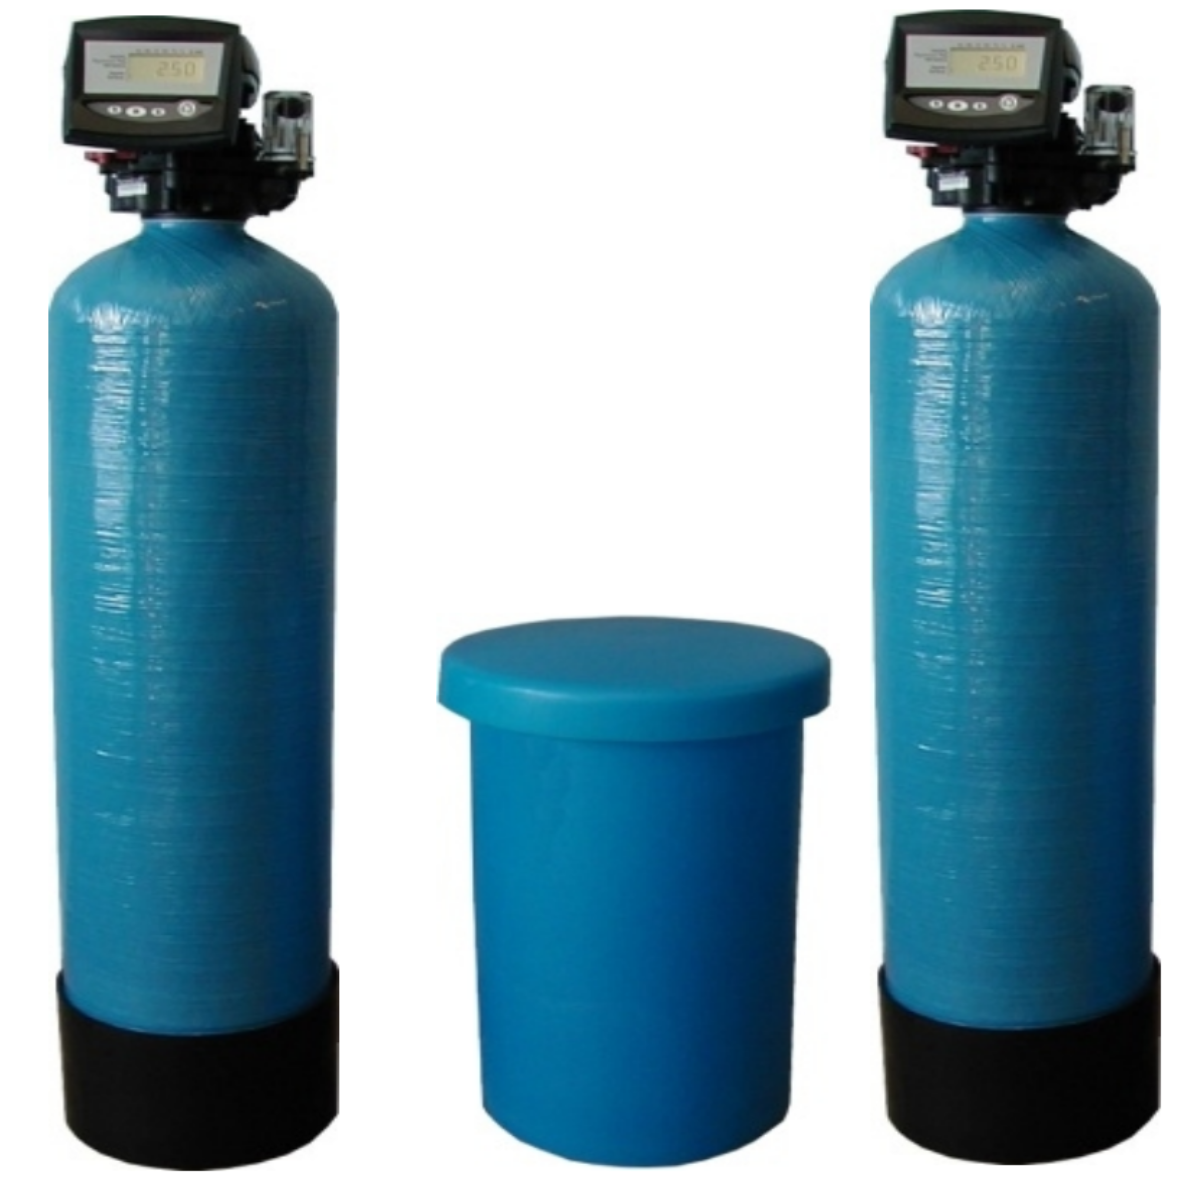 Duplex Autotrol 255 Meter Controlled Commercial Water Softener 13" x 54", 75 Litres